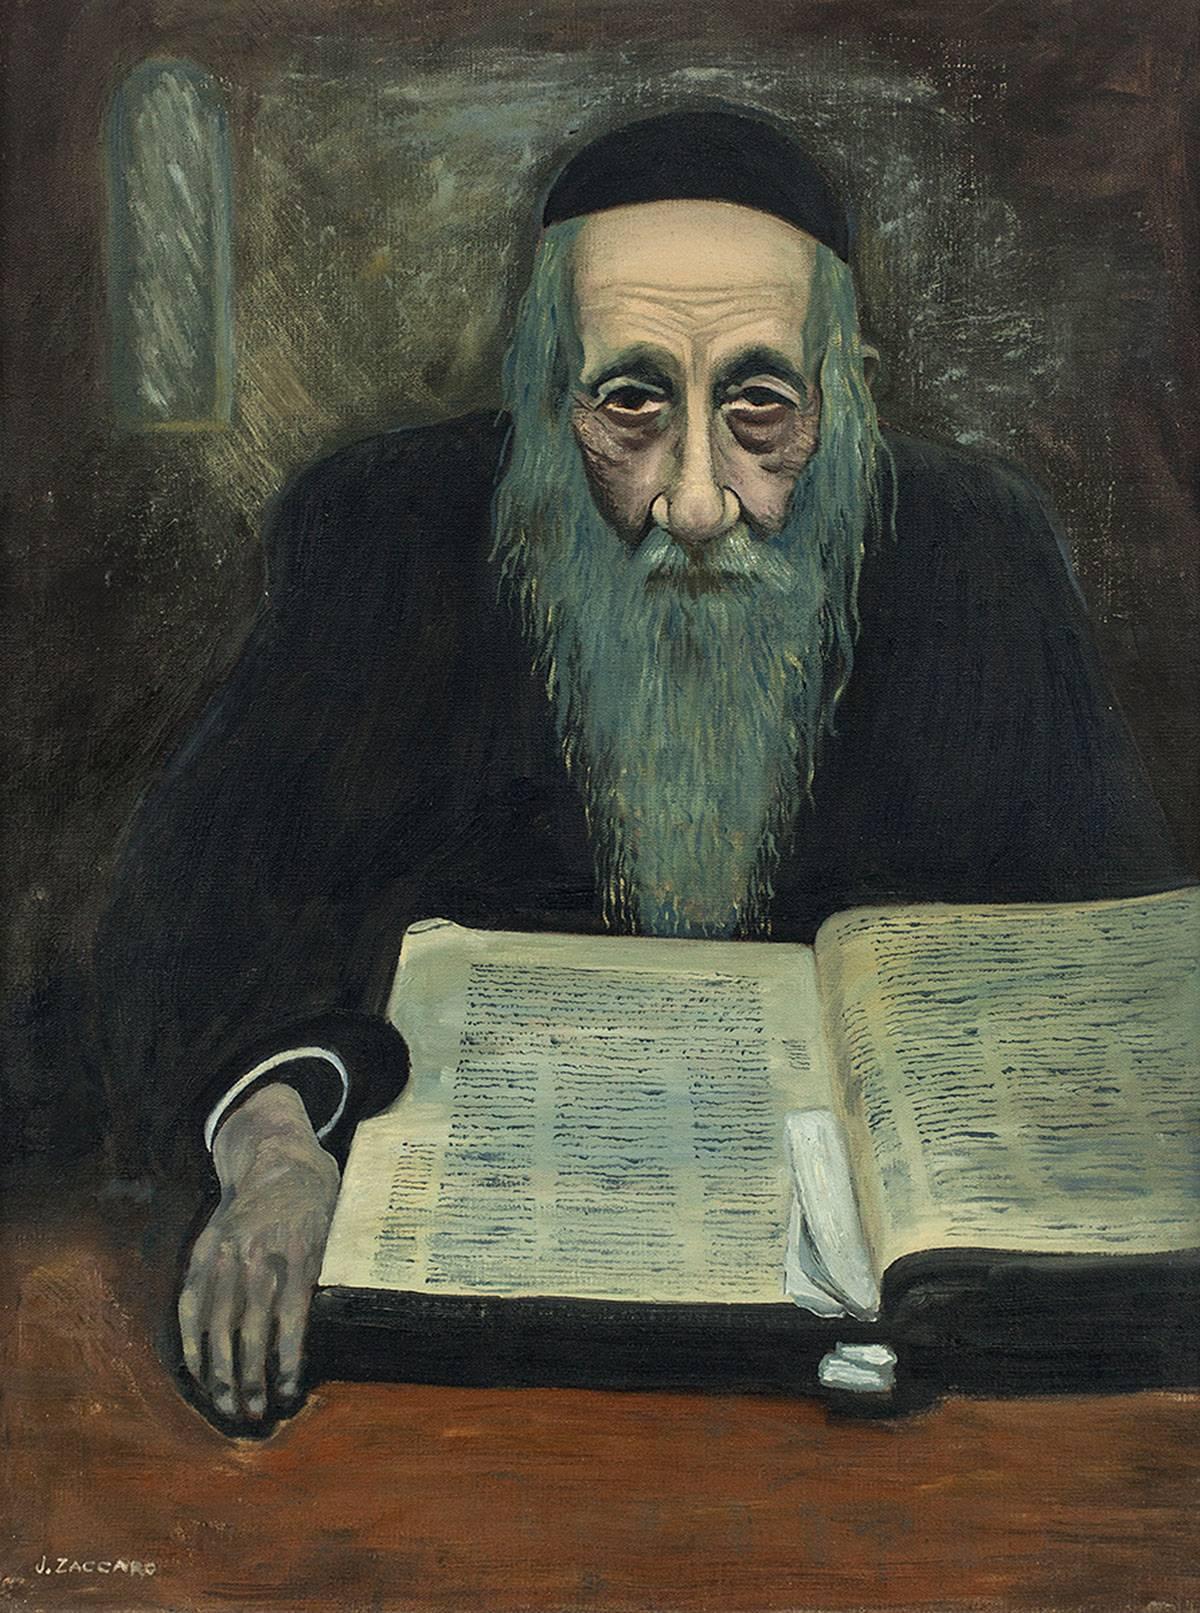 a moody atmospheric Judaica painting of a Rabbi studying Jewish texts.